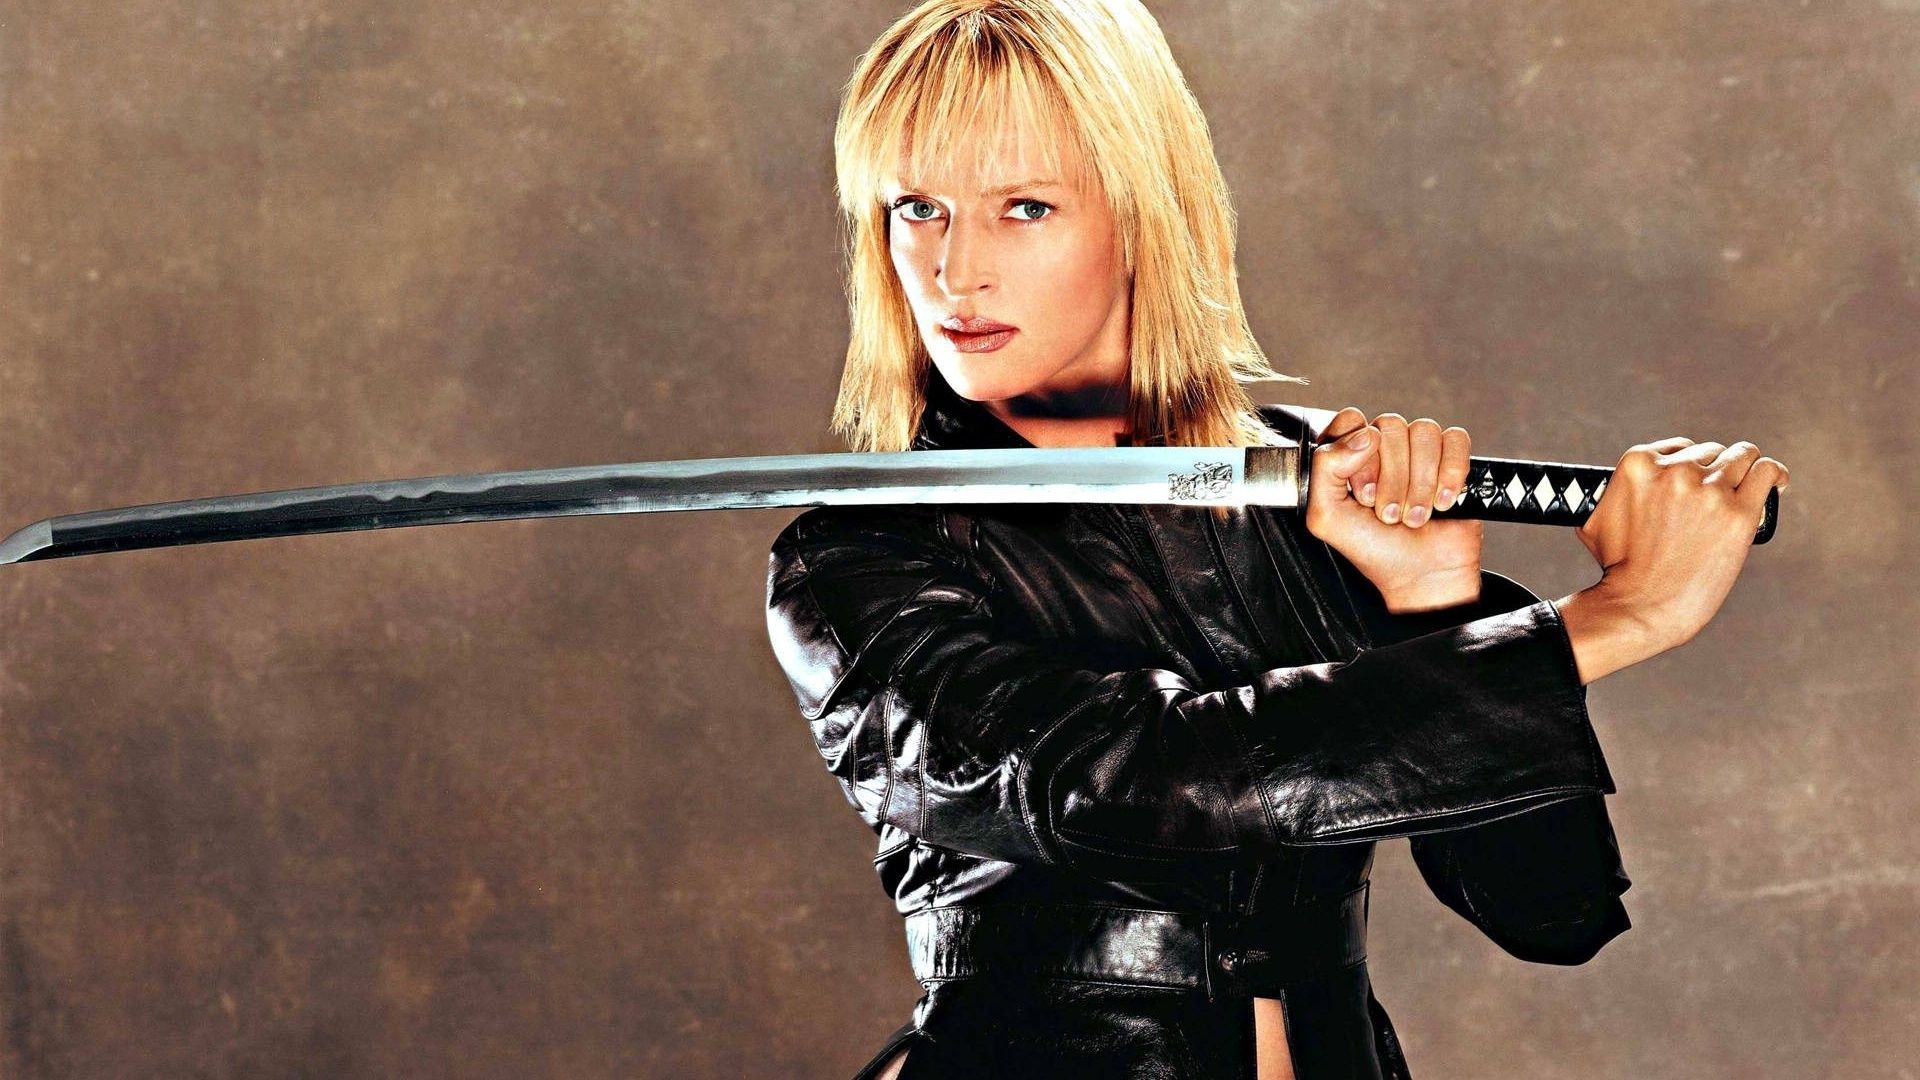 Make Some Impossible “Actress Vs. Character” Choices and We’ll Guess Your Exact Age and Height Kill Bill